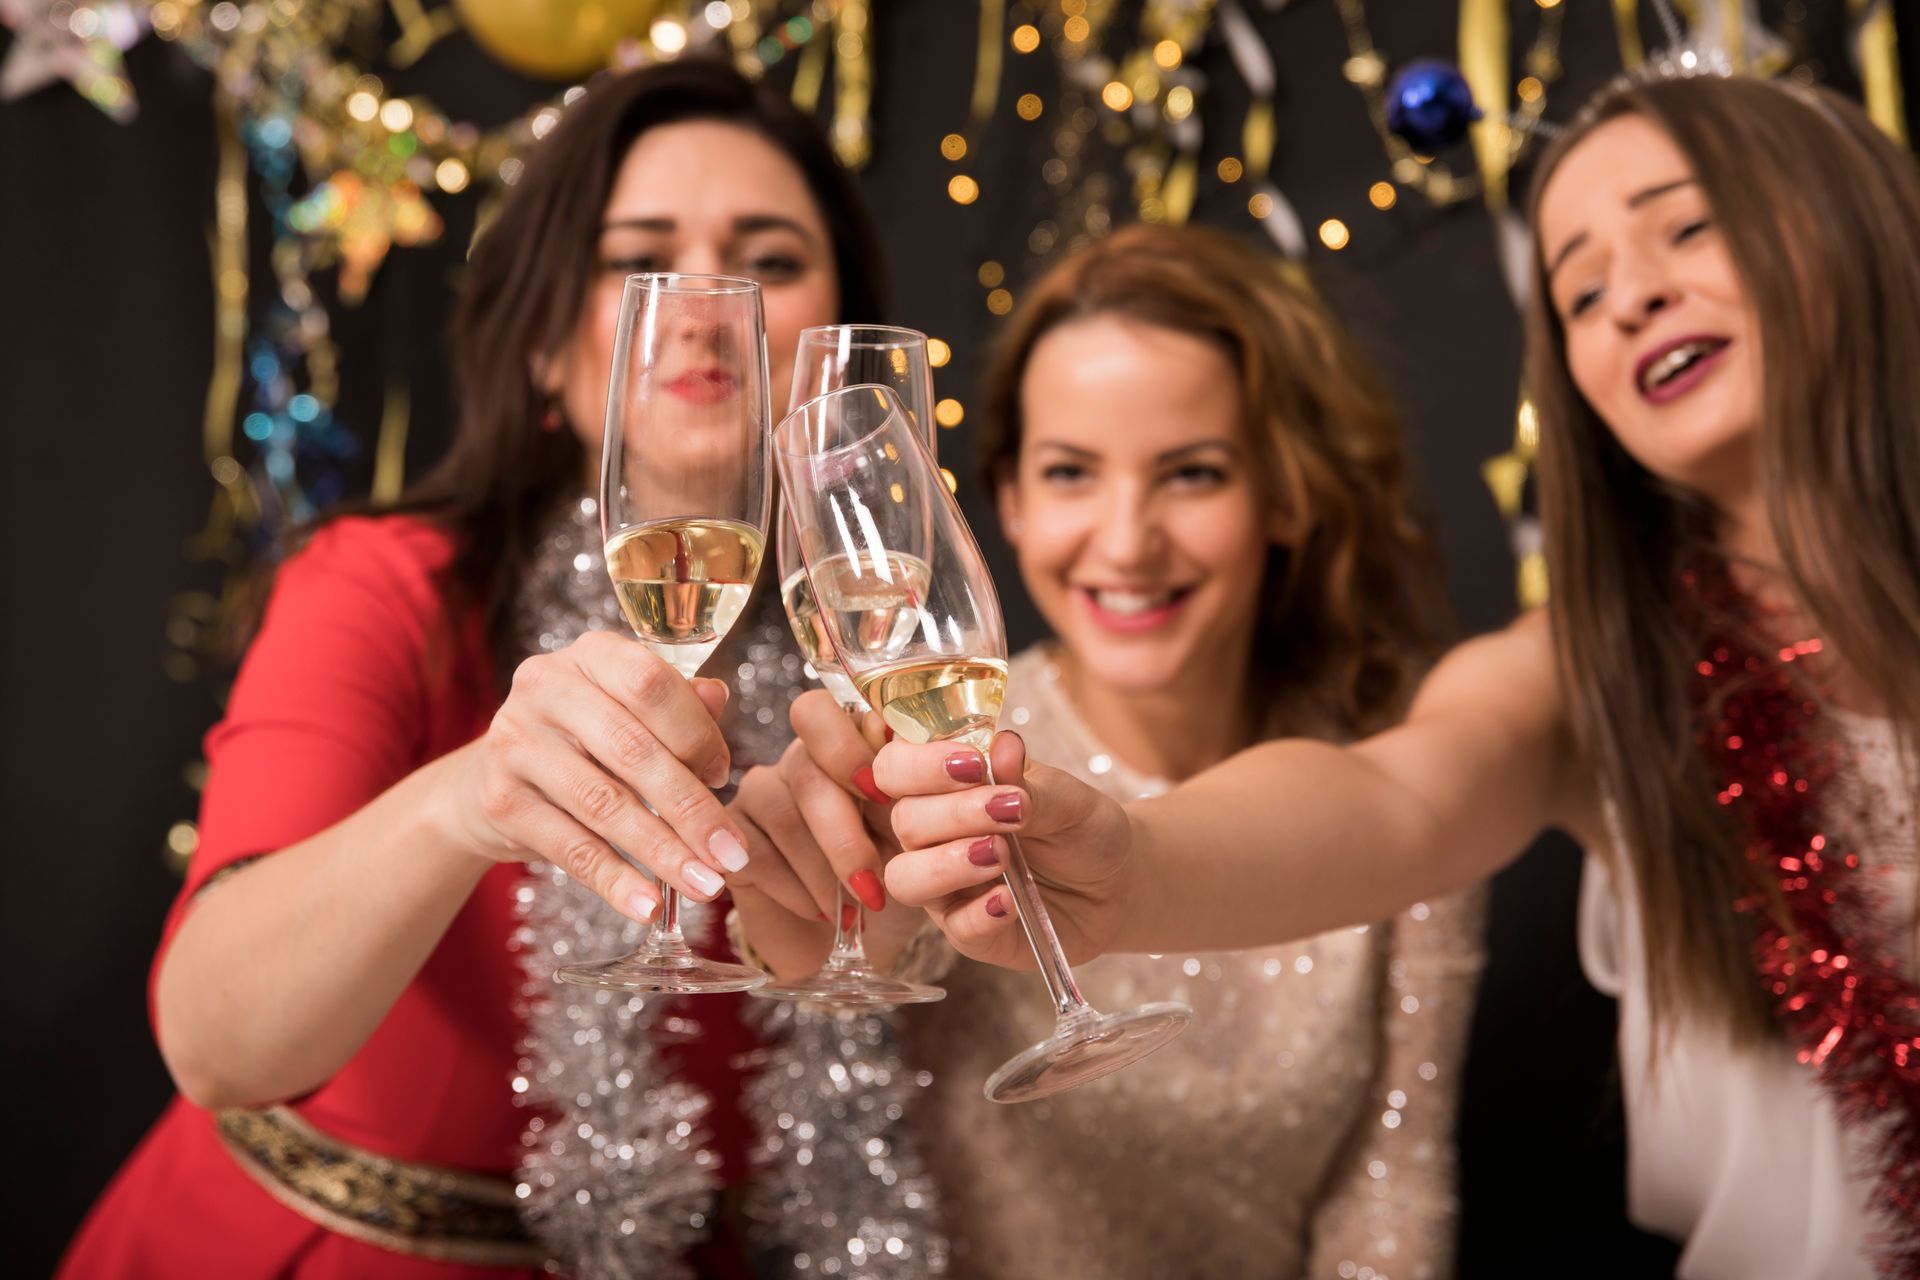 Three women are toasting with champagne glasses at a party.